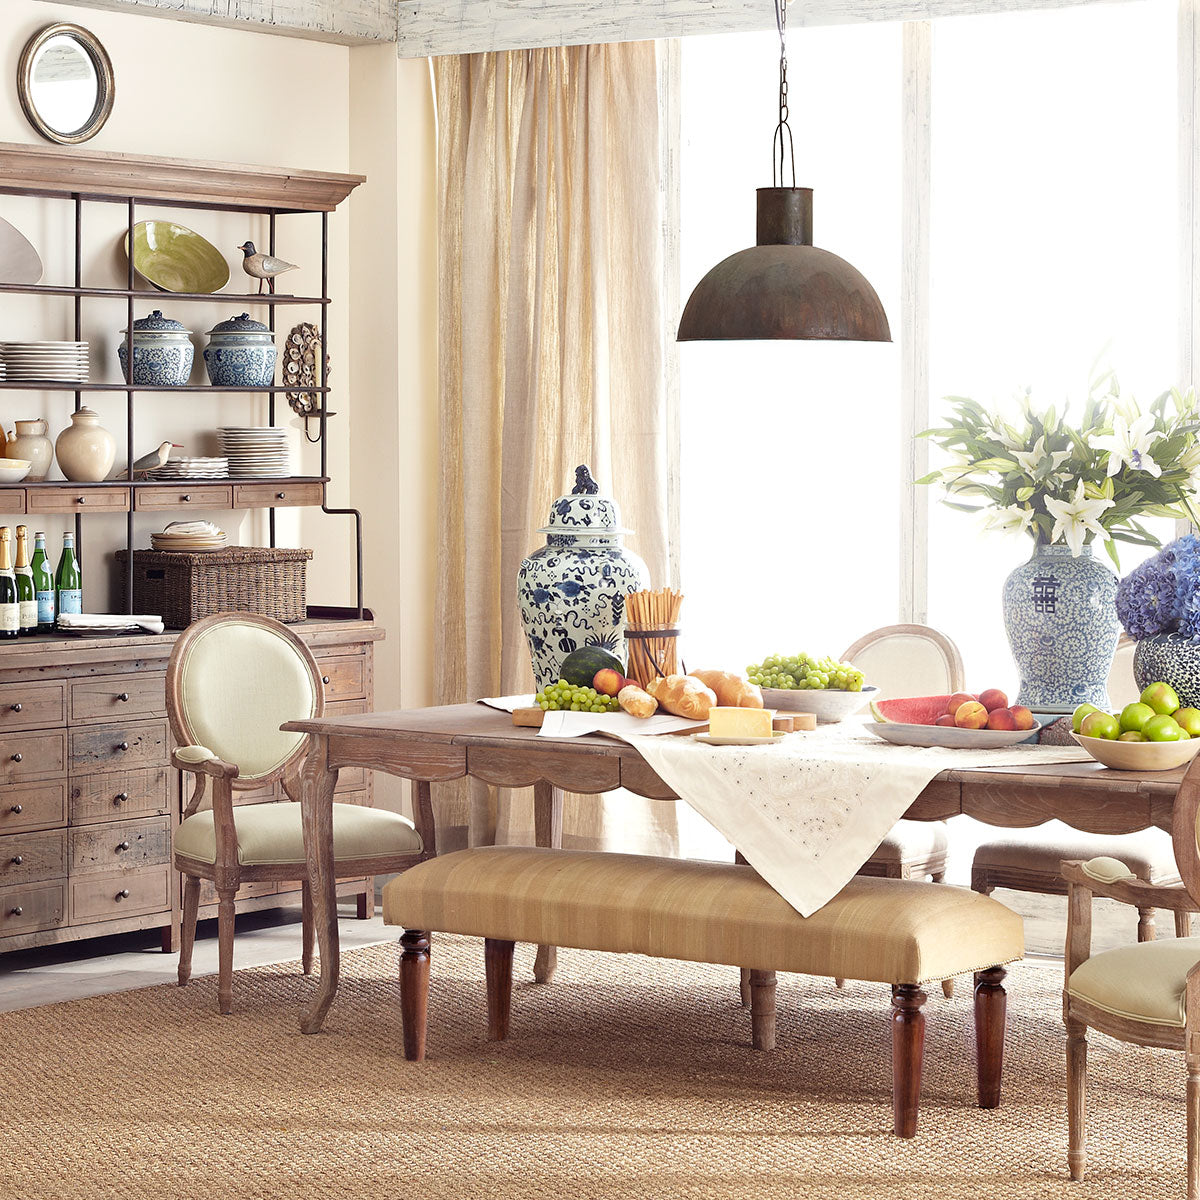 French Country Dining Table - Weathered in a Dining Room Setting: Standing on a Beige Carpet